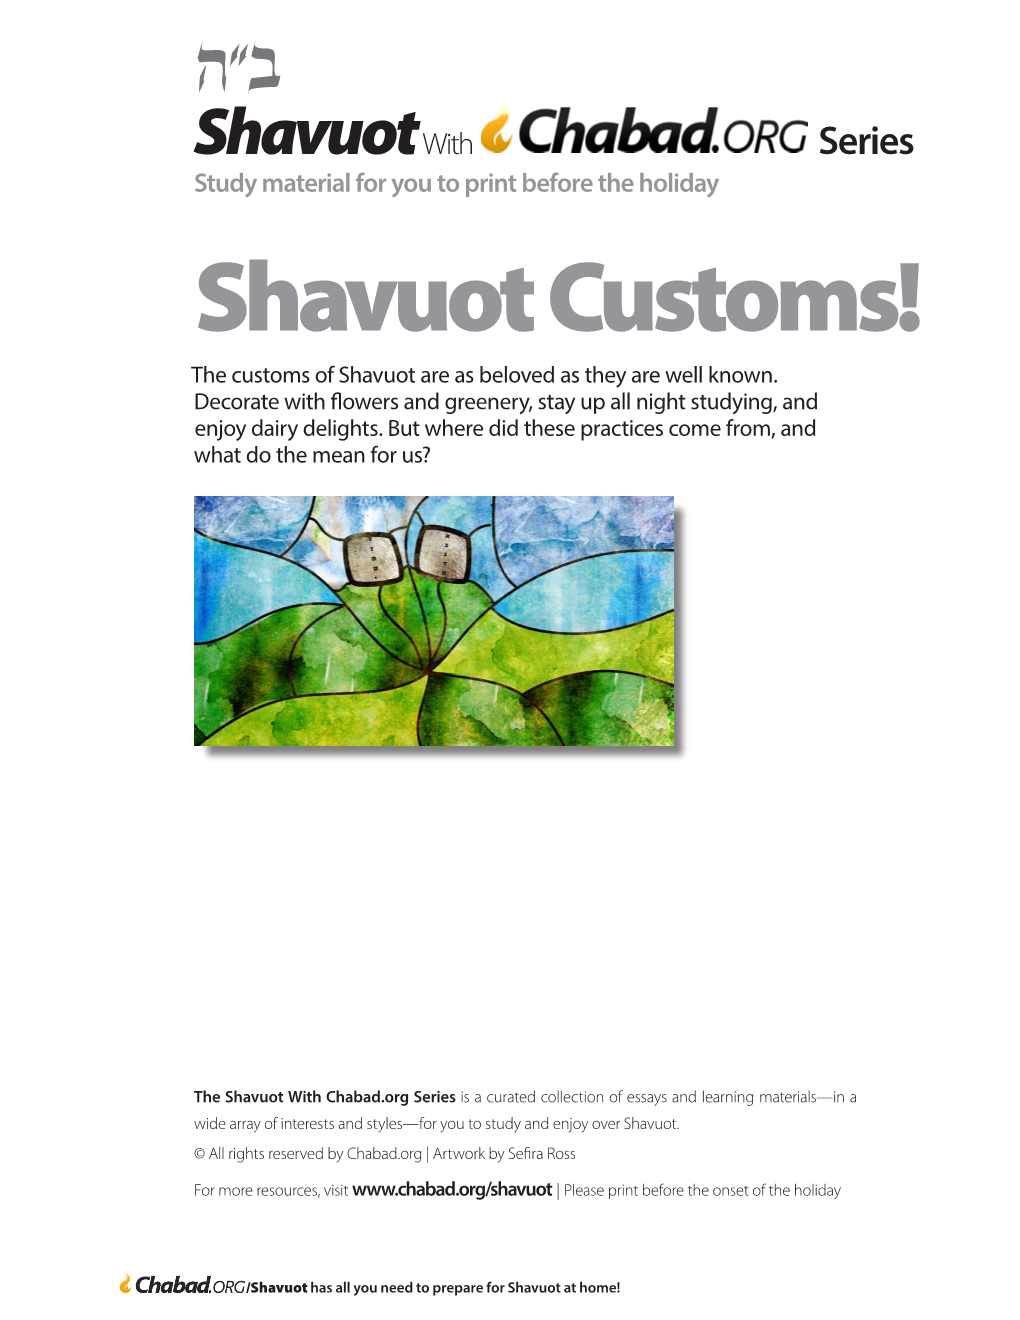 Shavuot Customs! the Customs of Shavuot Are As Beloved As They Are Well Known